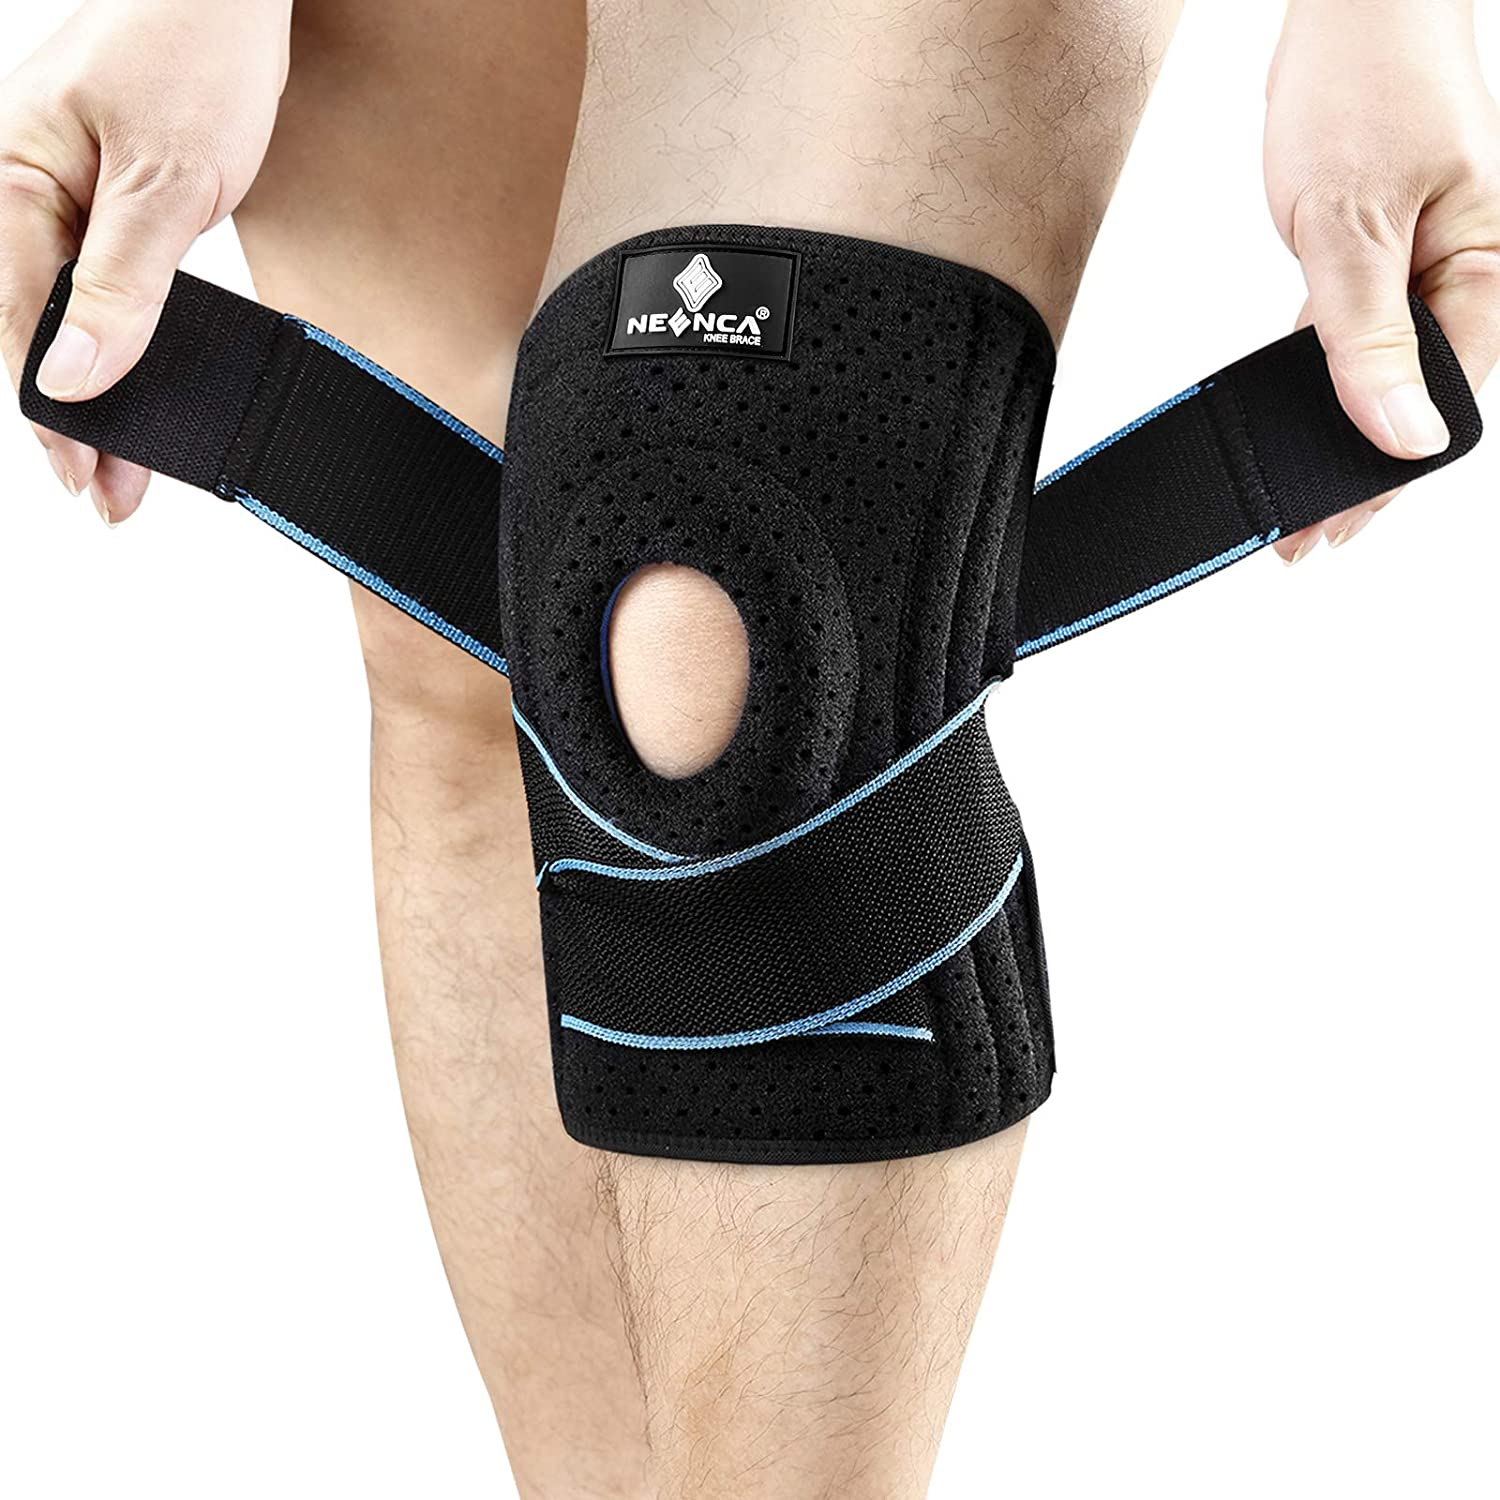 NEENCA Copper Knee Brace, Professional Knee Support with Patella